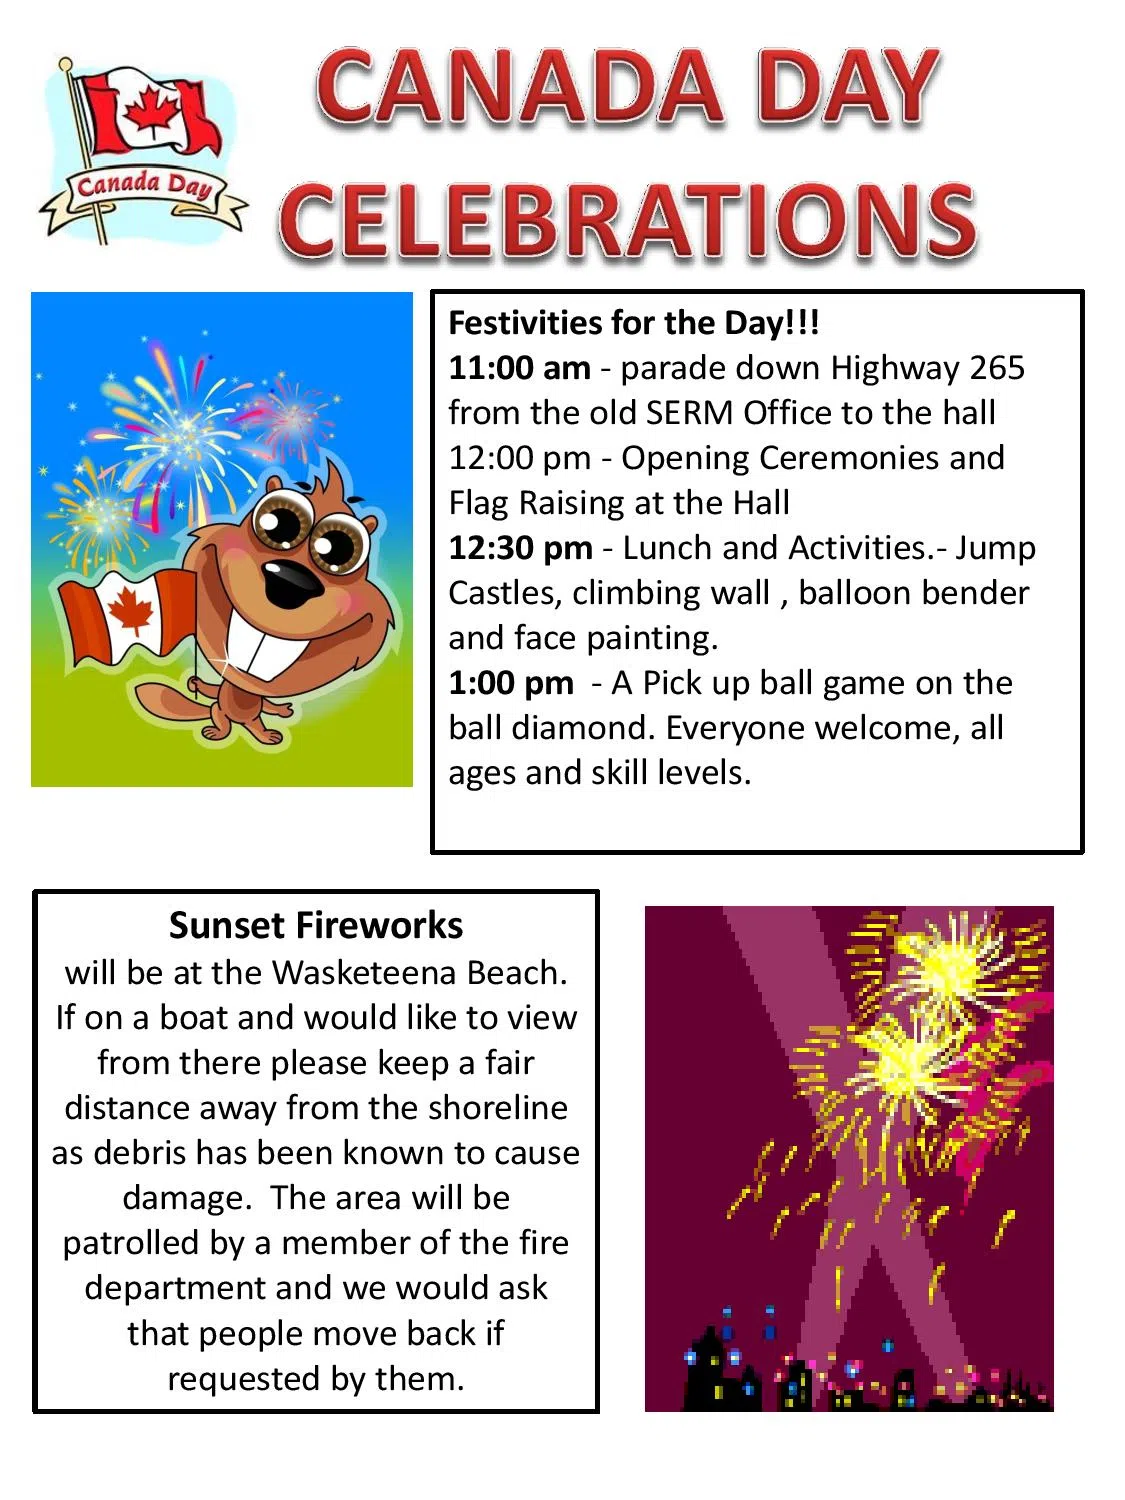 Canada Day Celebrations at Candle Lake paNOW